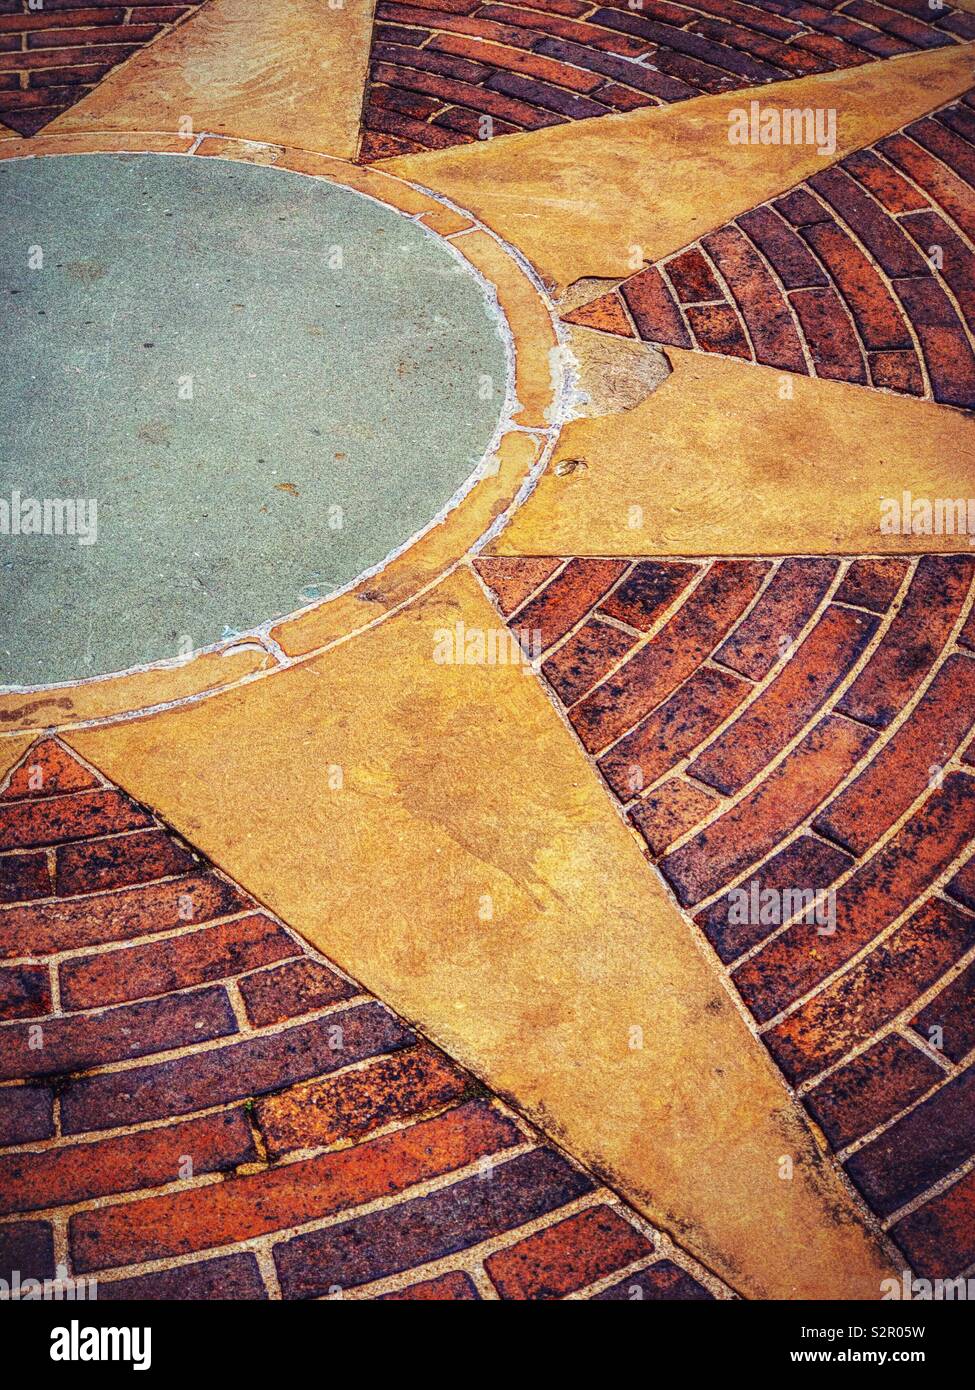 Detail of star paving and red bricks. Stock Photo